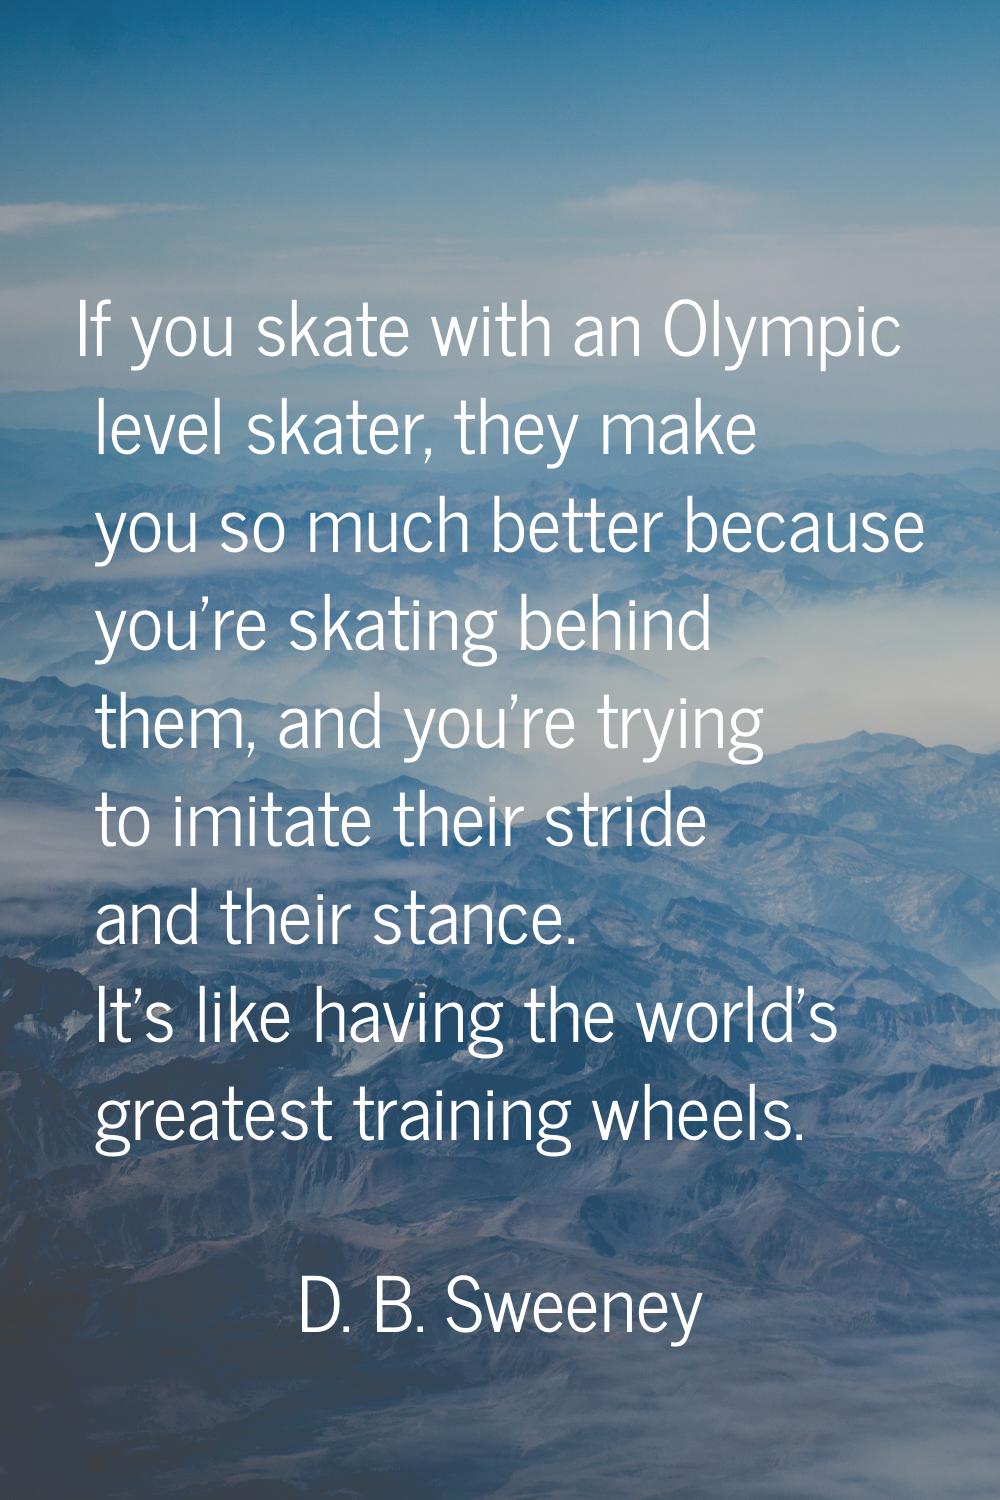 If you skate with an Olympic level skater, they make you so much better because you're skating behi